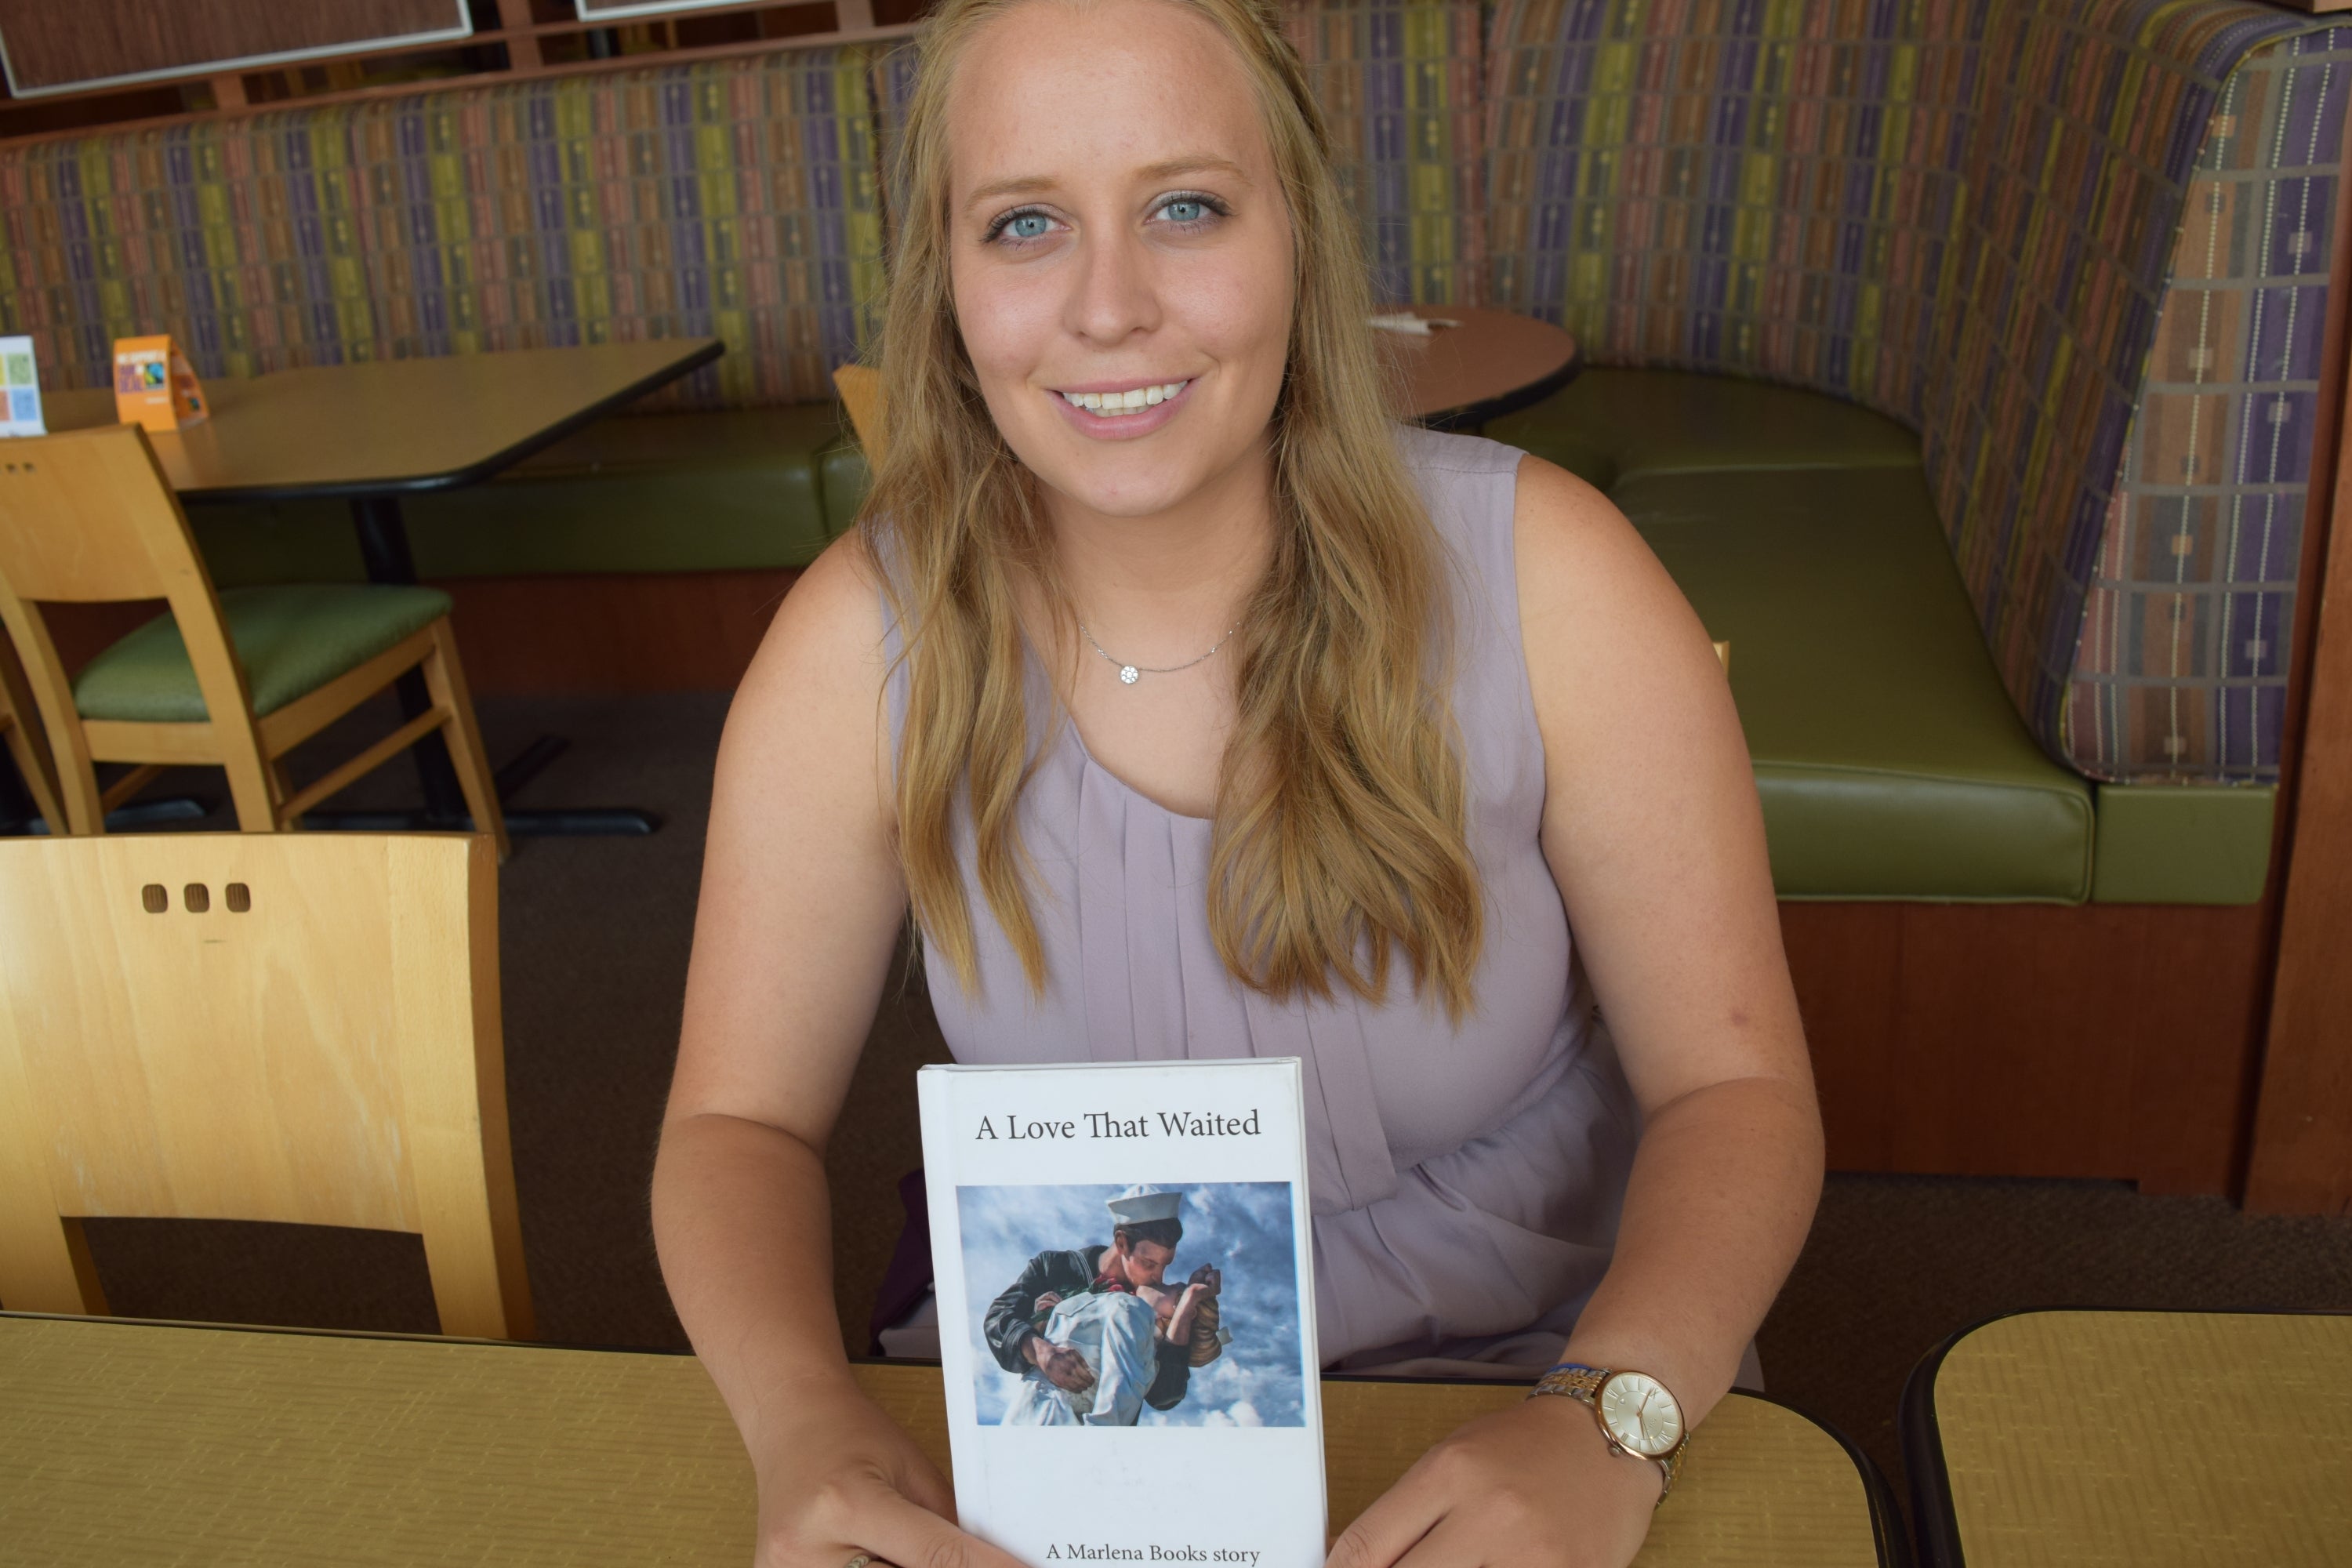 Rachel Thompson and one of the Marlena Books